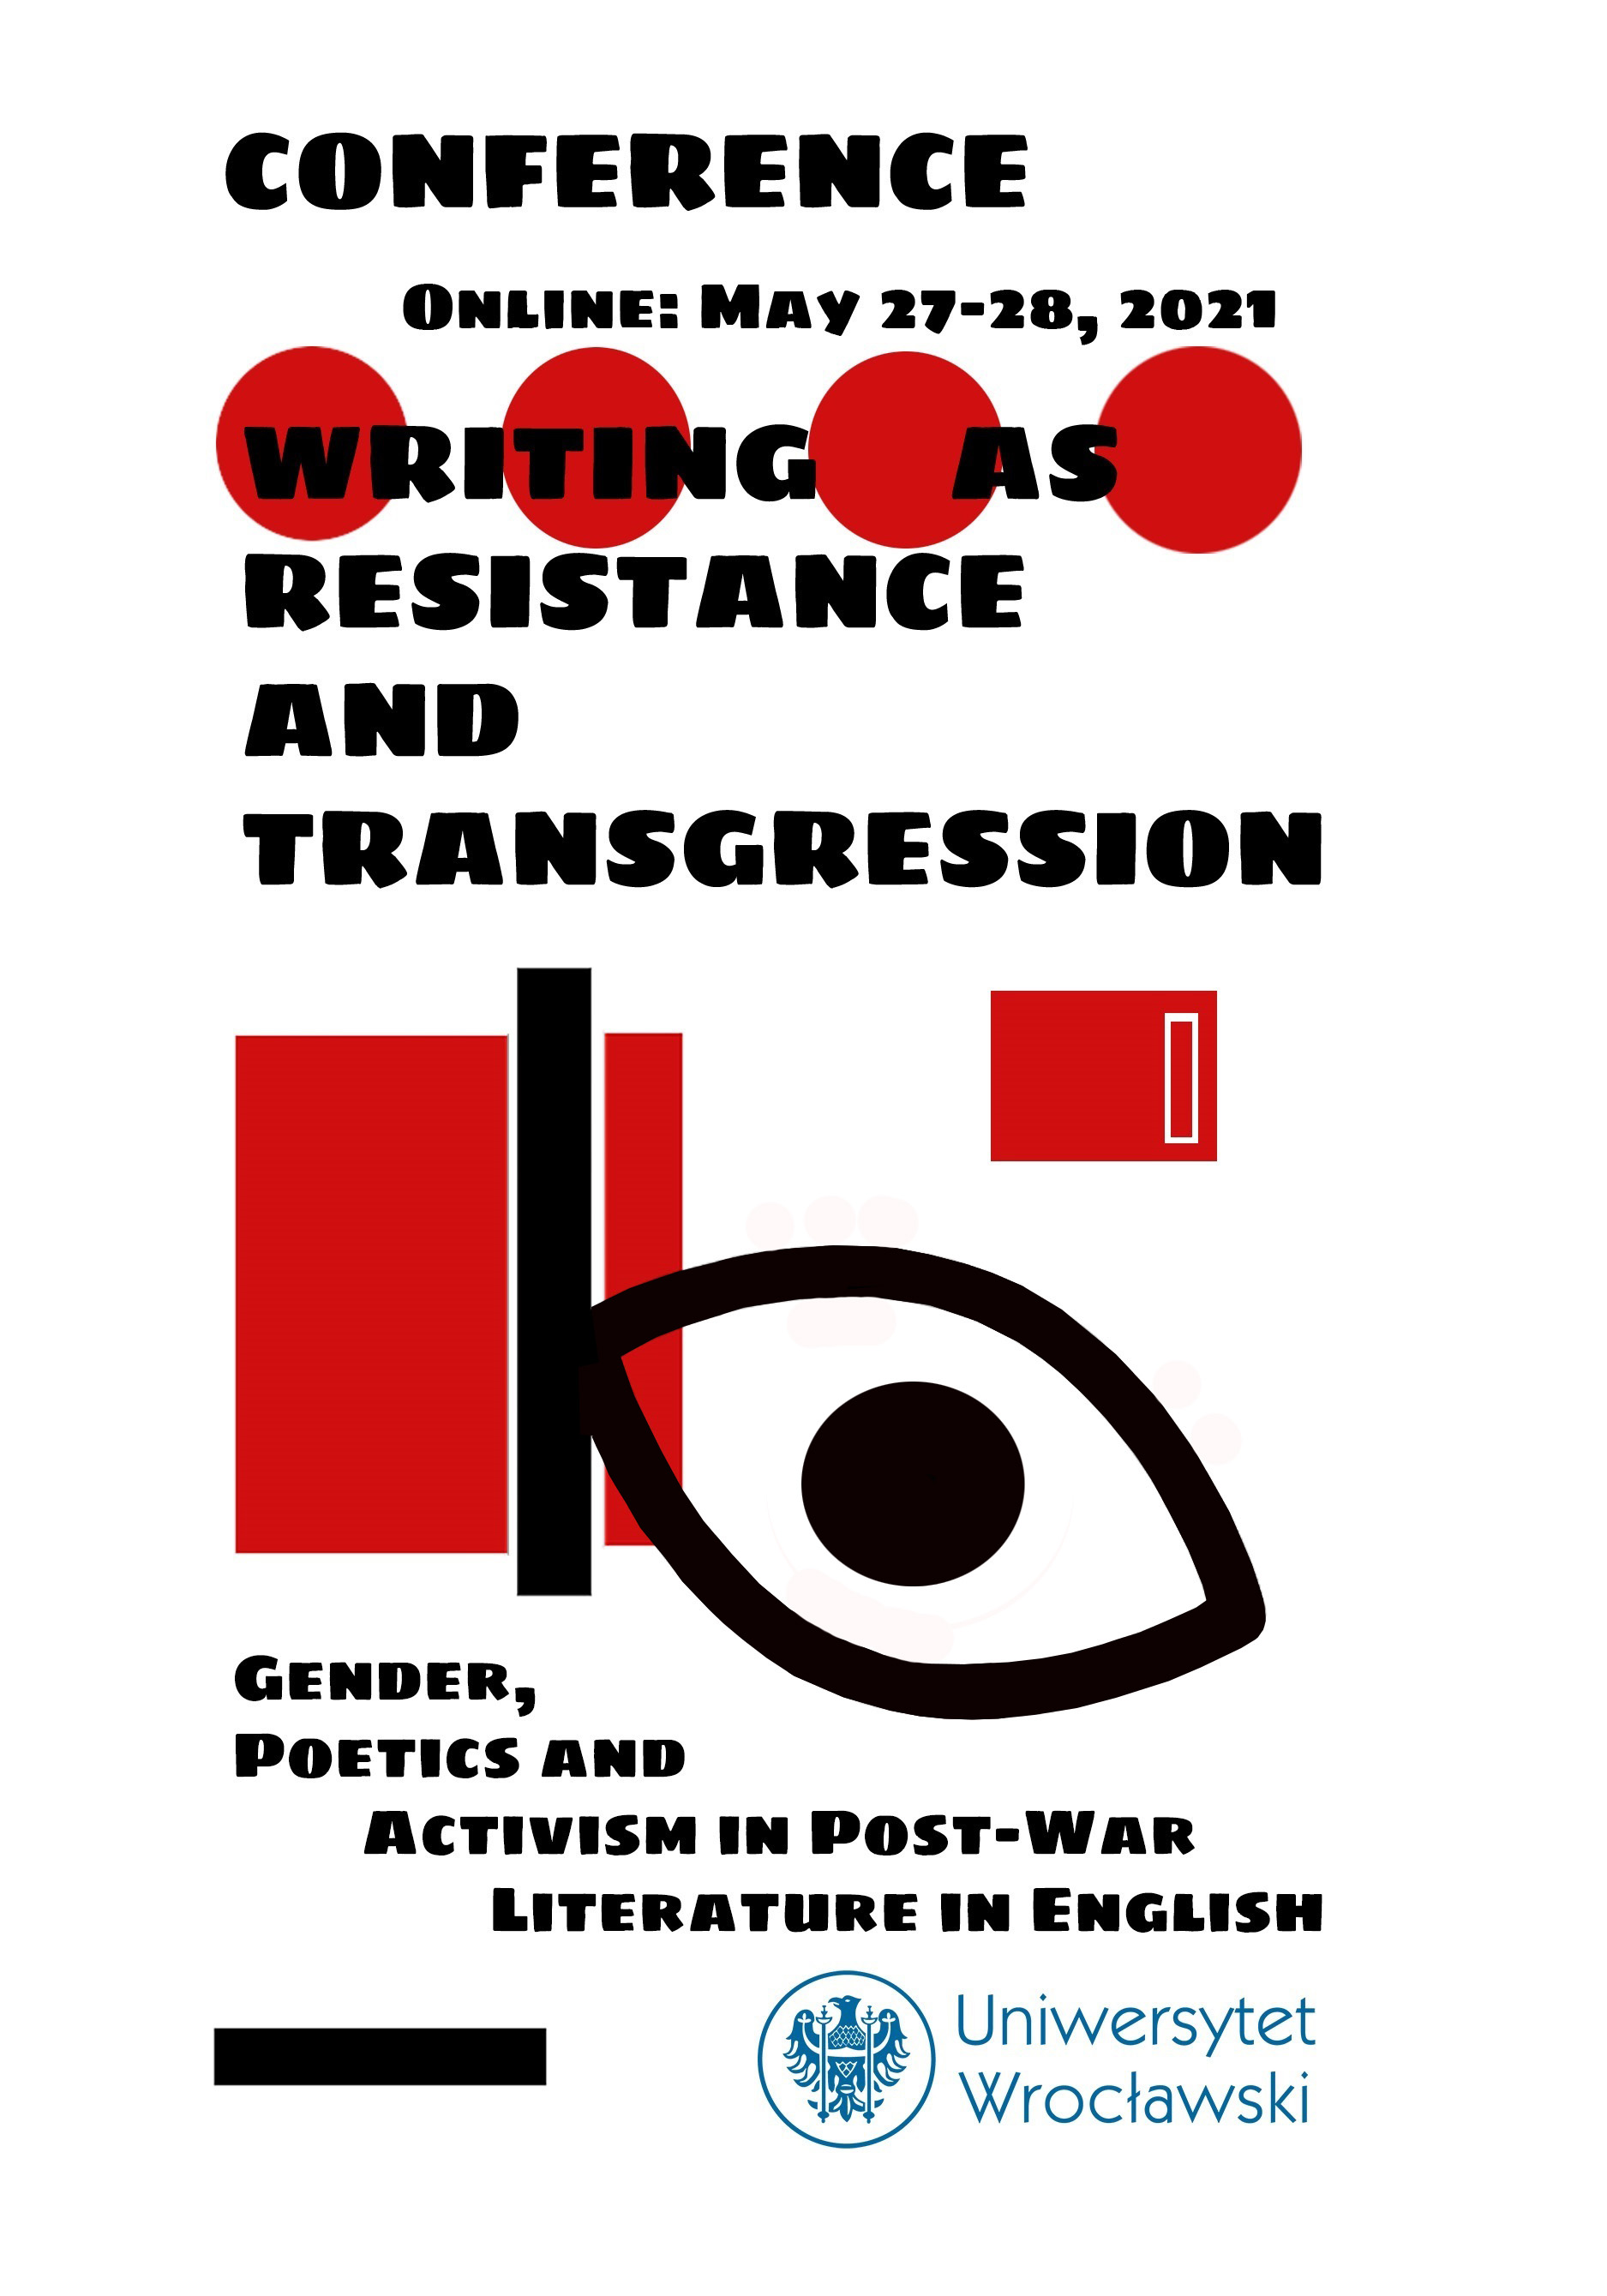 Annexe post-531212-Poster_WritingAsResistance_UWr_IFA_Conference.jpg